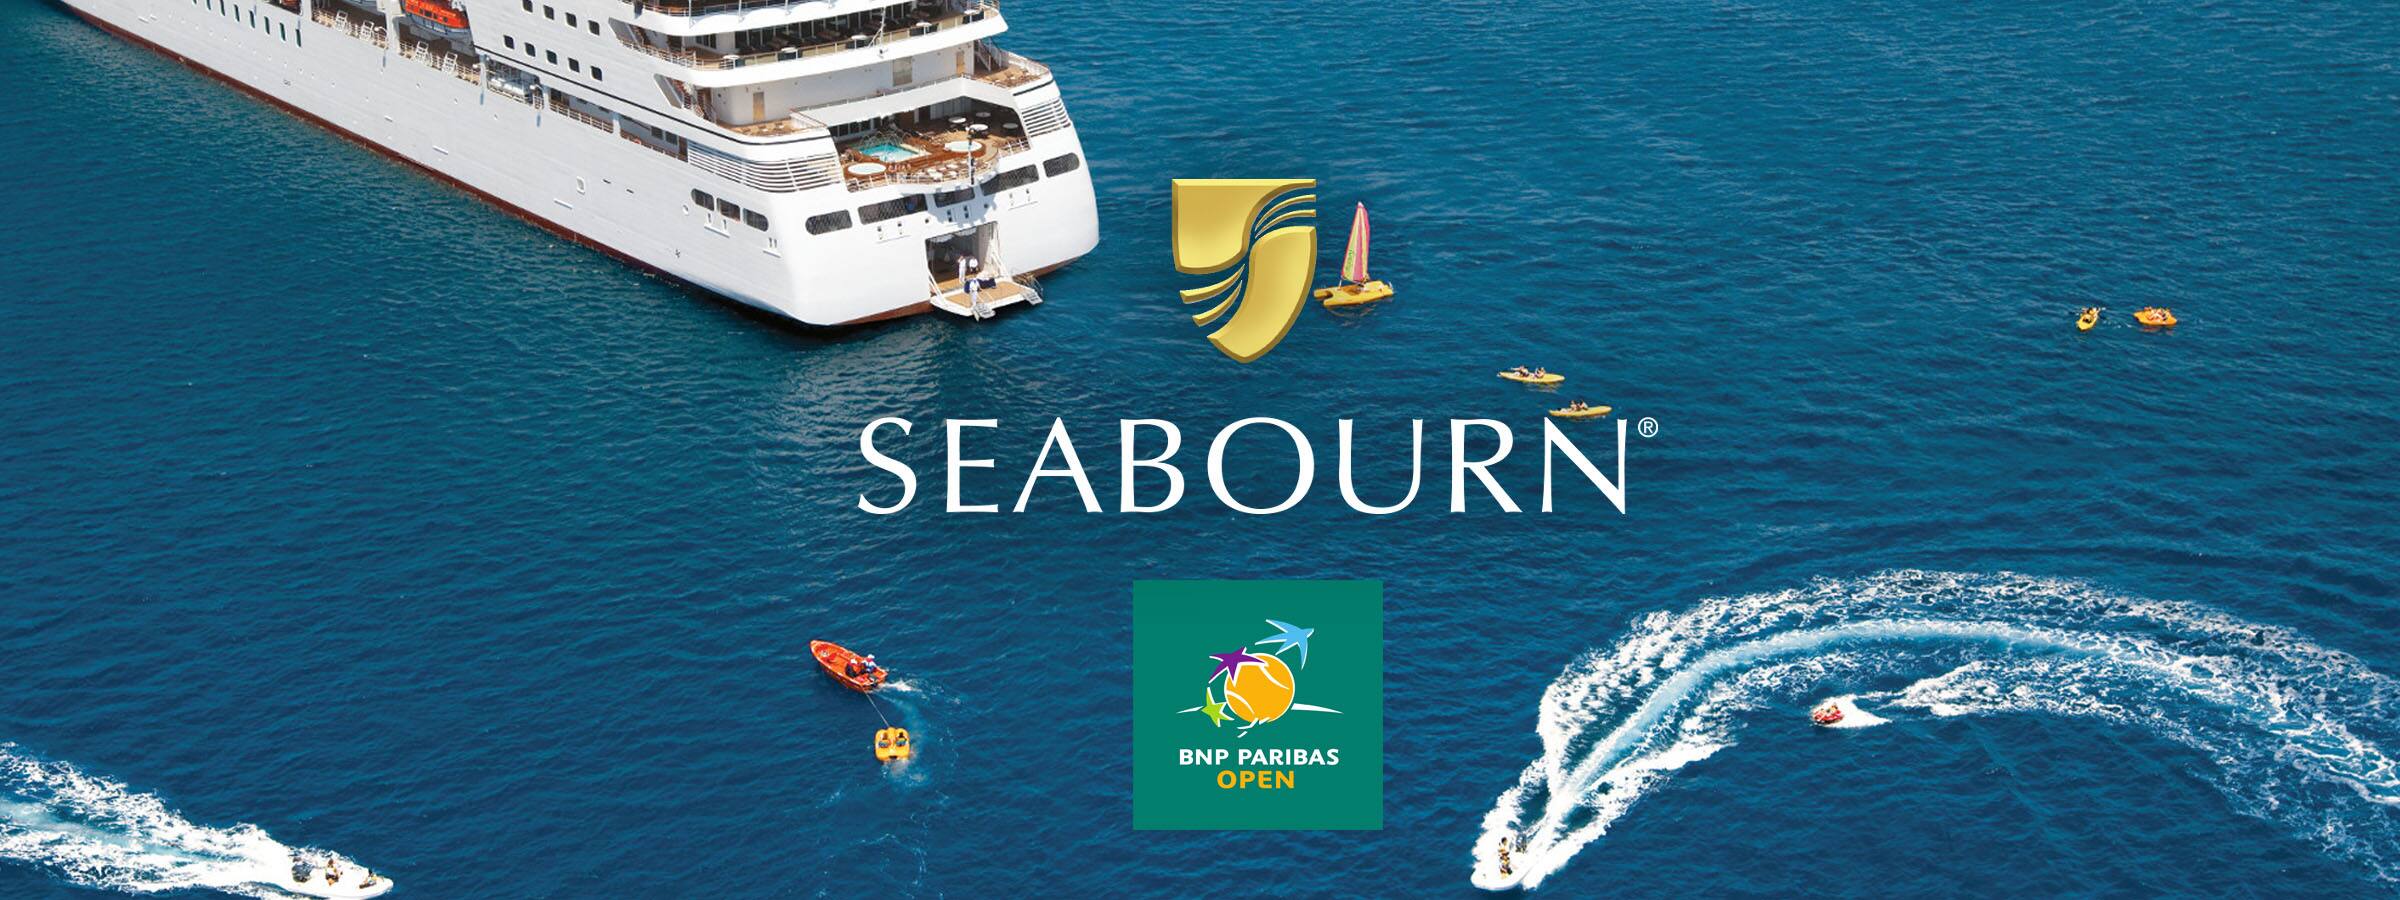 Thank you for visiting Seabourn at the BNP Paribas Open